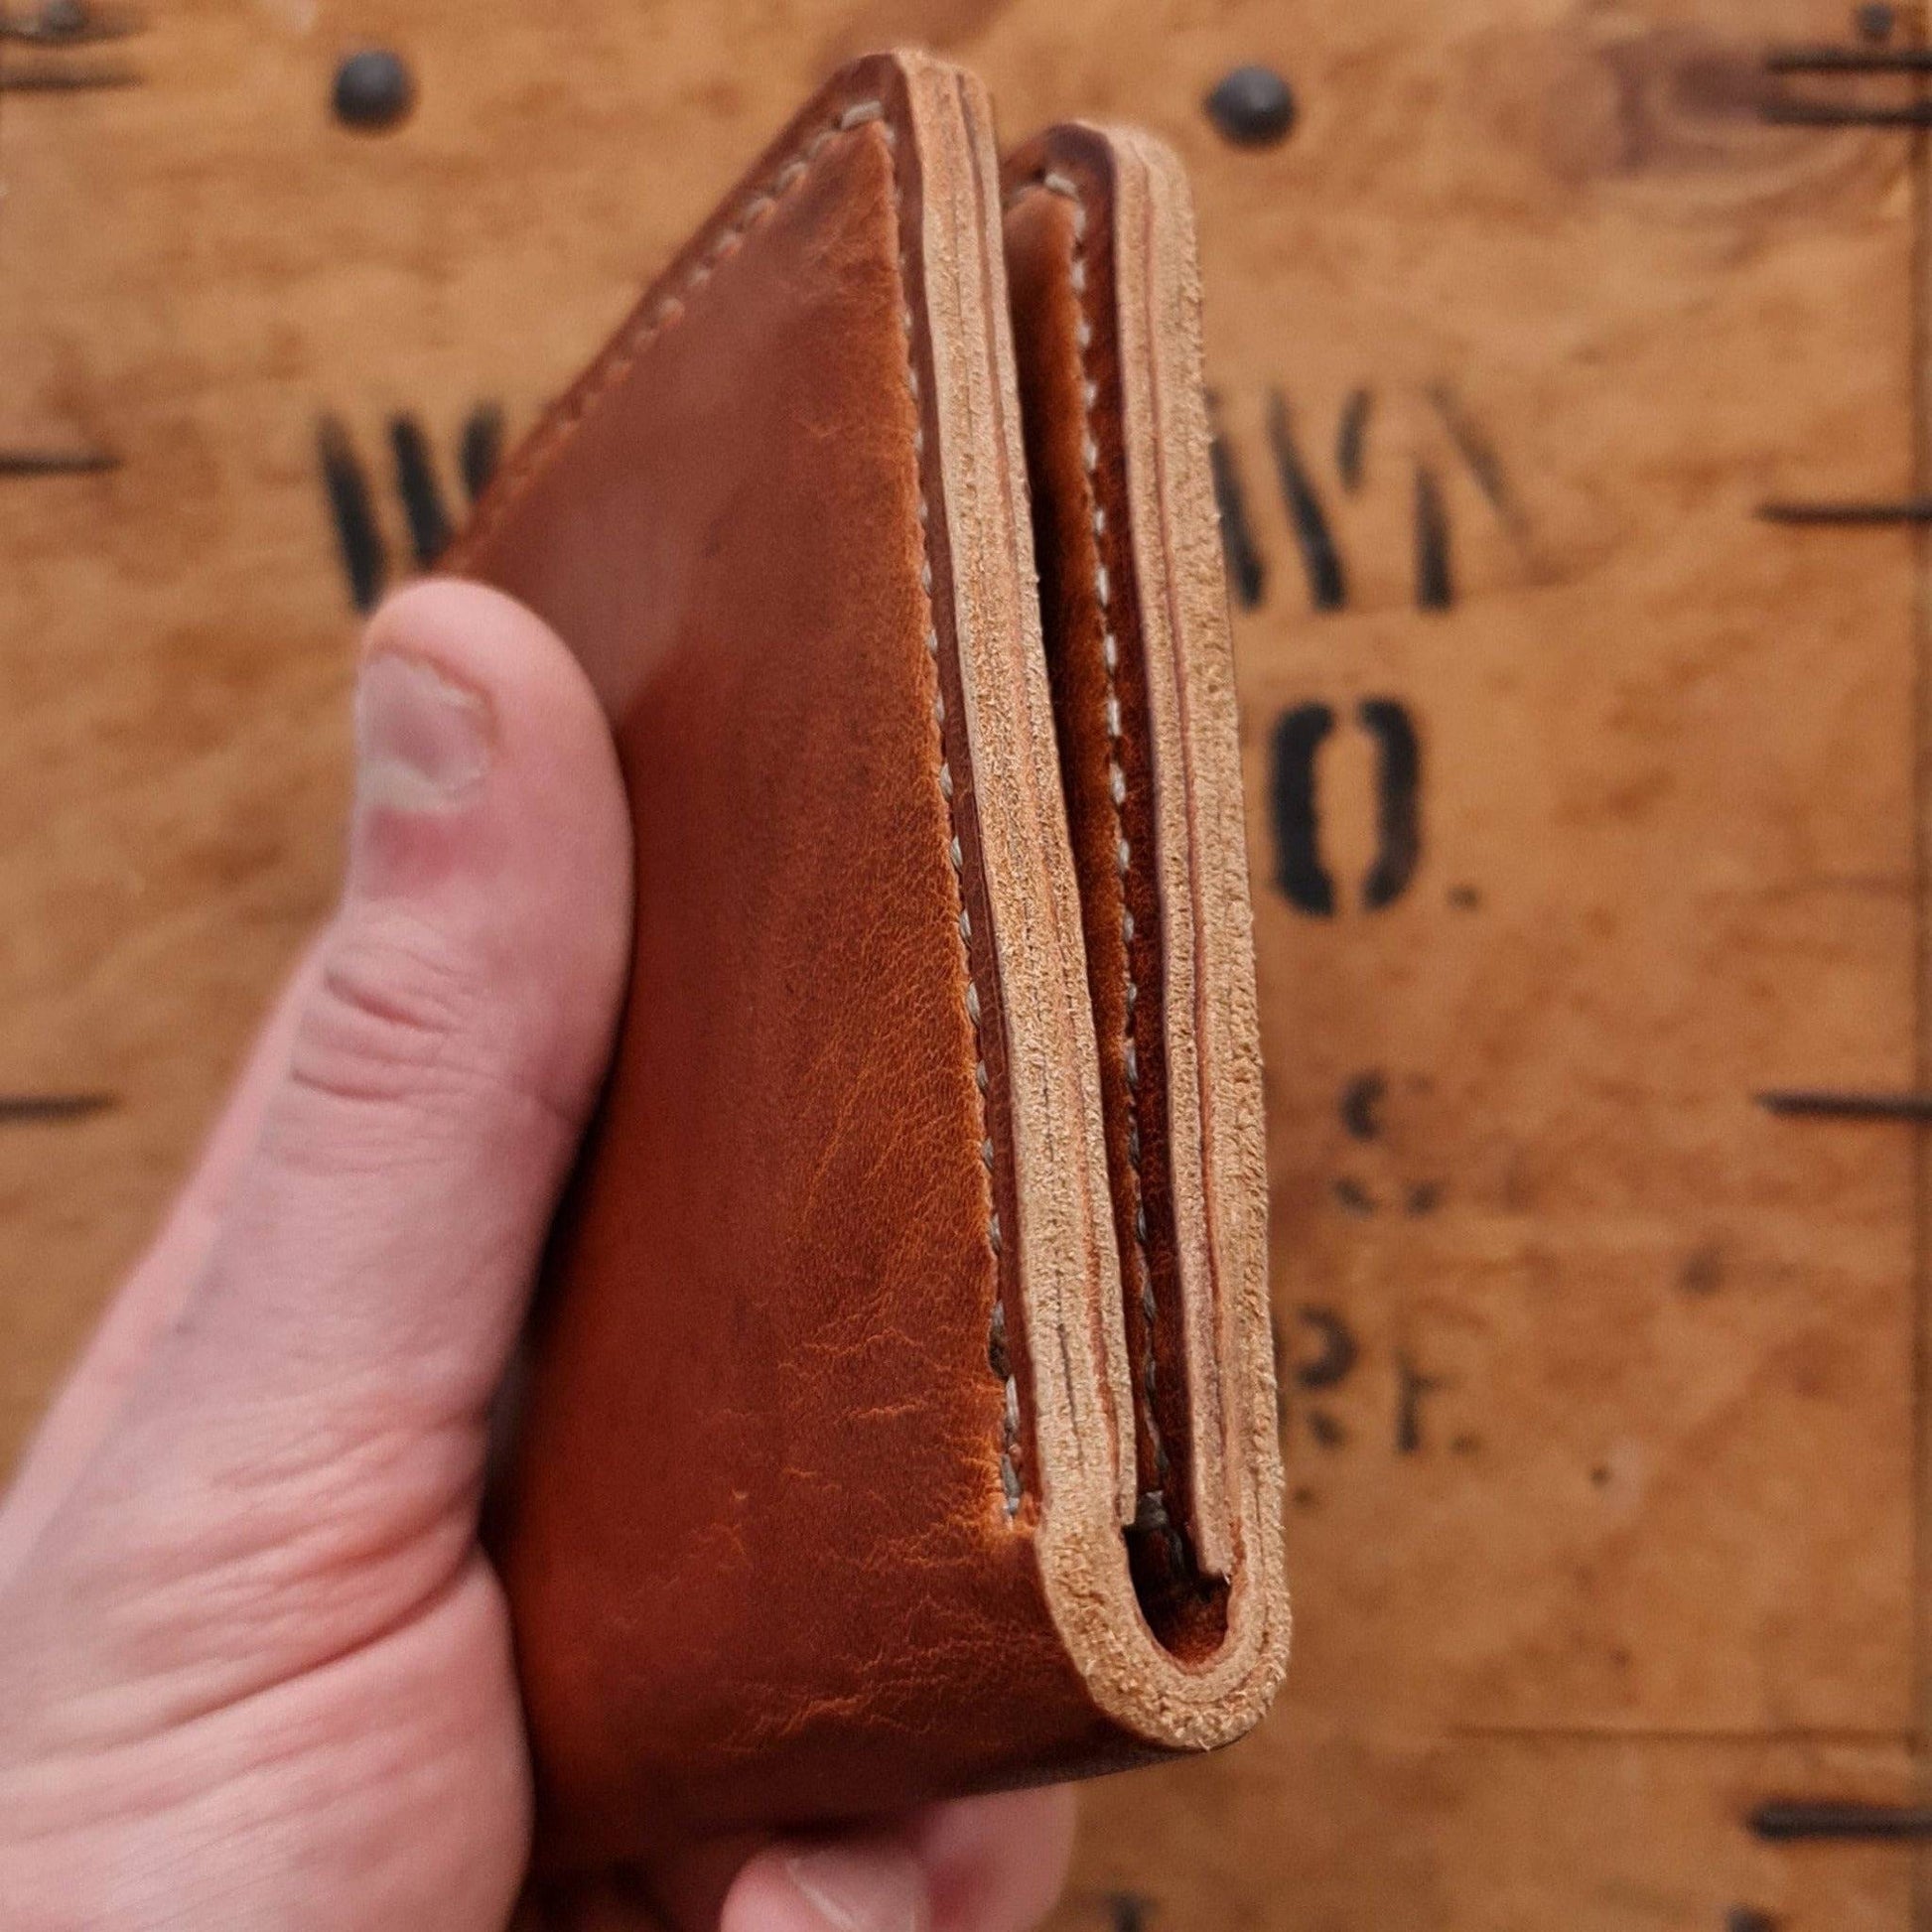 Card Holder in English Tan Leather